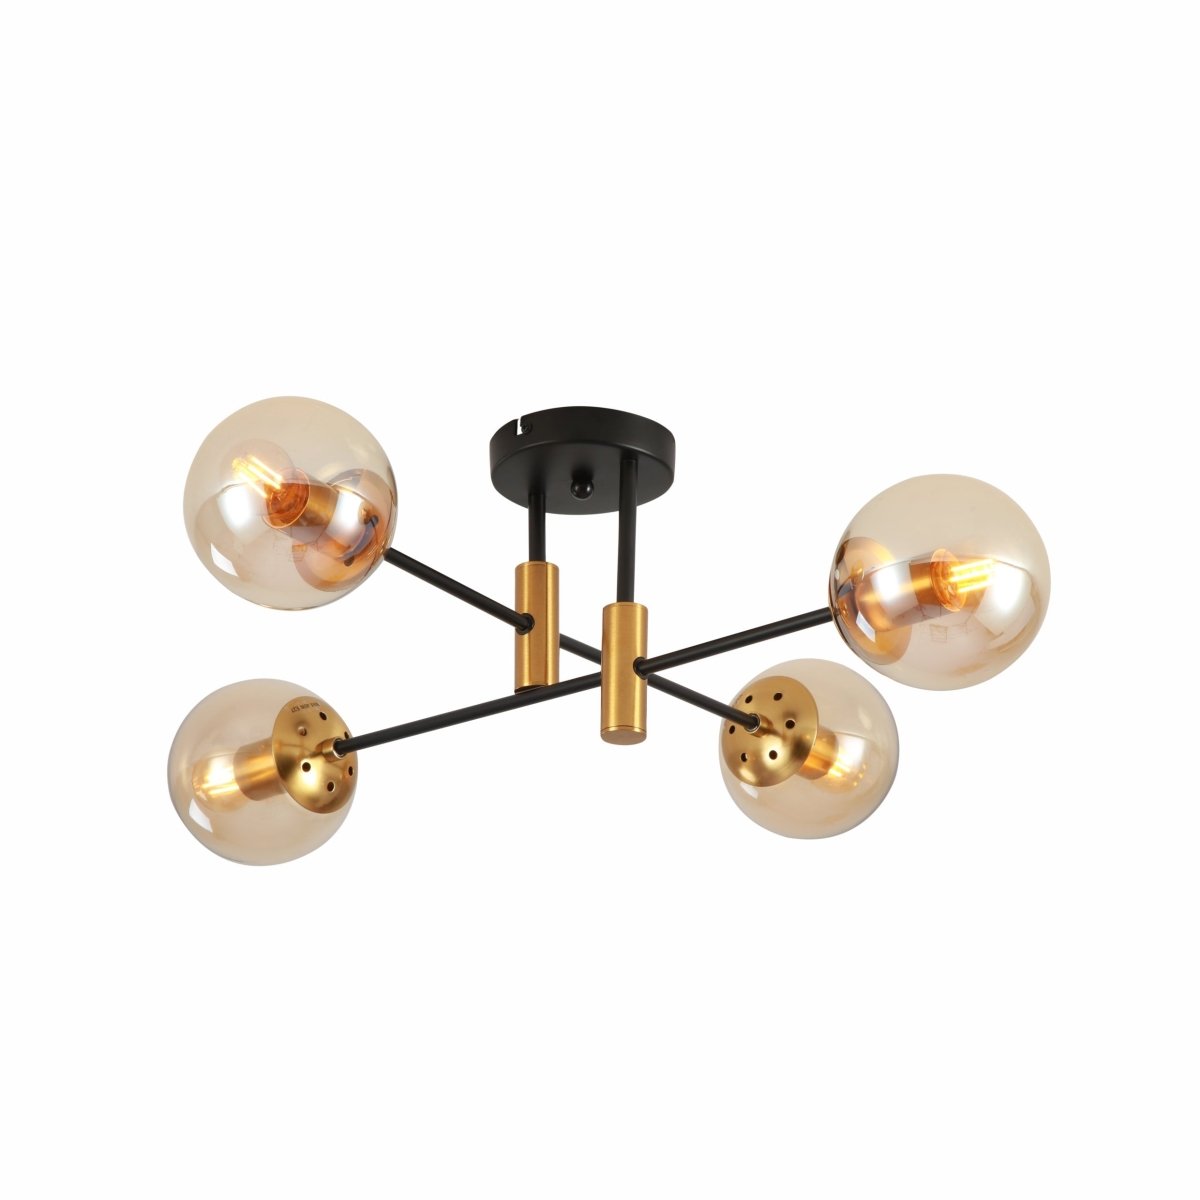 Main image of Amber Glass Globe Gold and Black Metal Semi Flush Ceiling Light with 4xE27 Fitting | TEKLED 159-17426